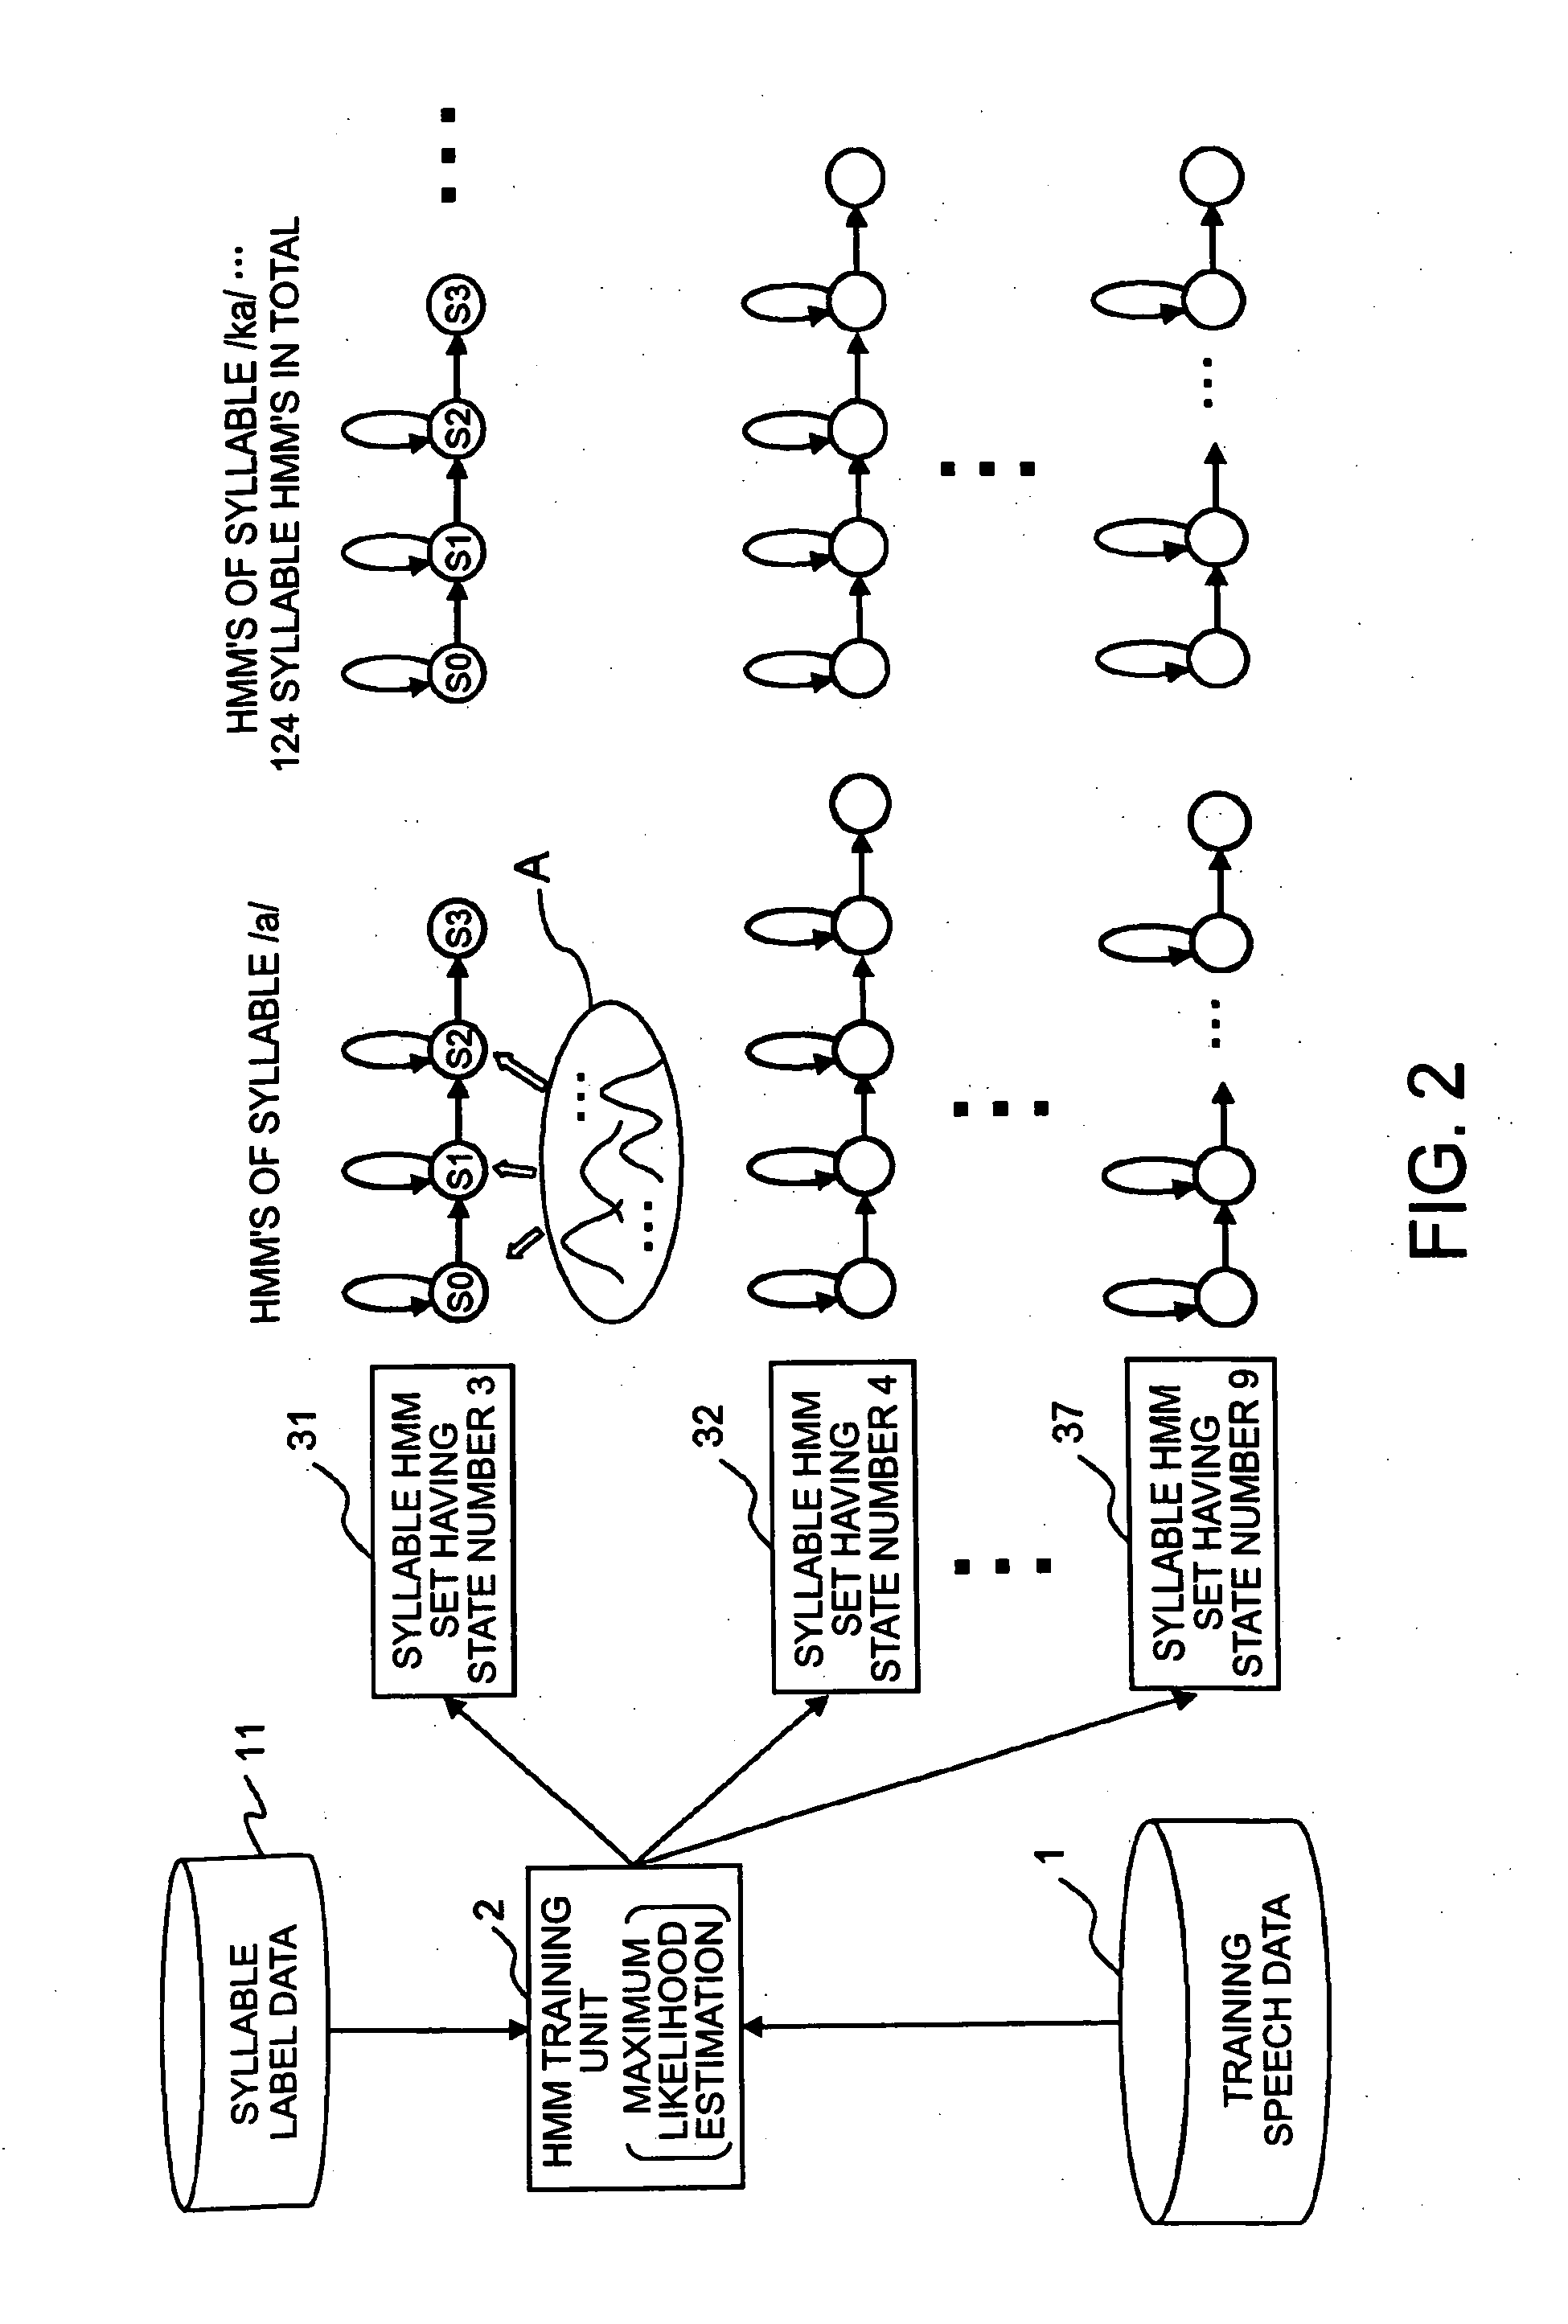 Acoustic model creating method, acoustic model creating apparatus, acoustic model creating program, and speech recognition apparatus